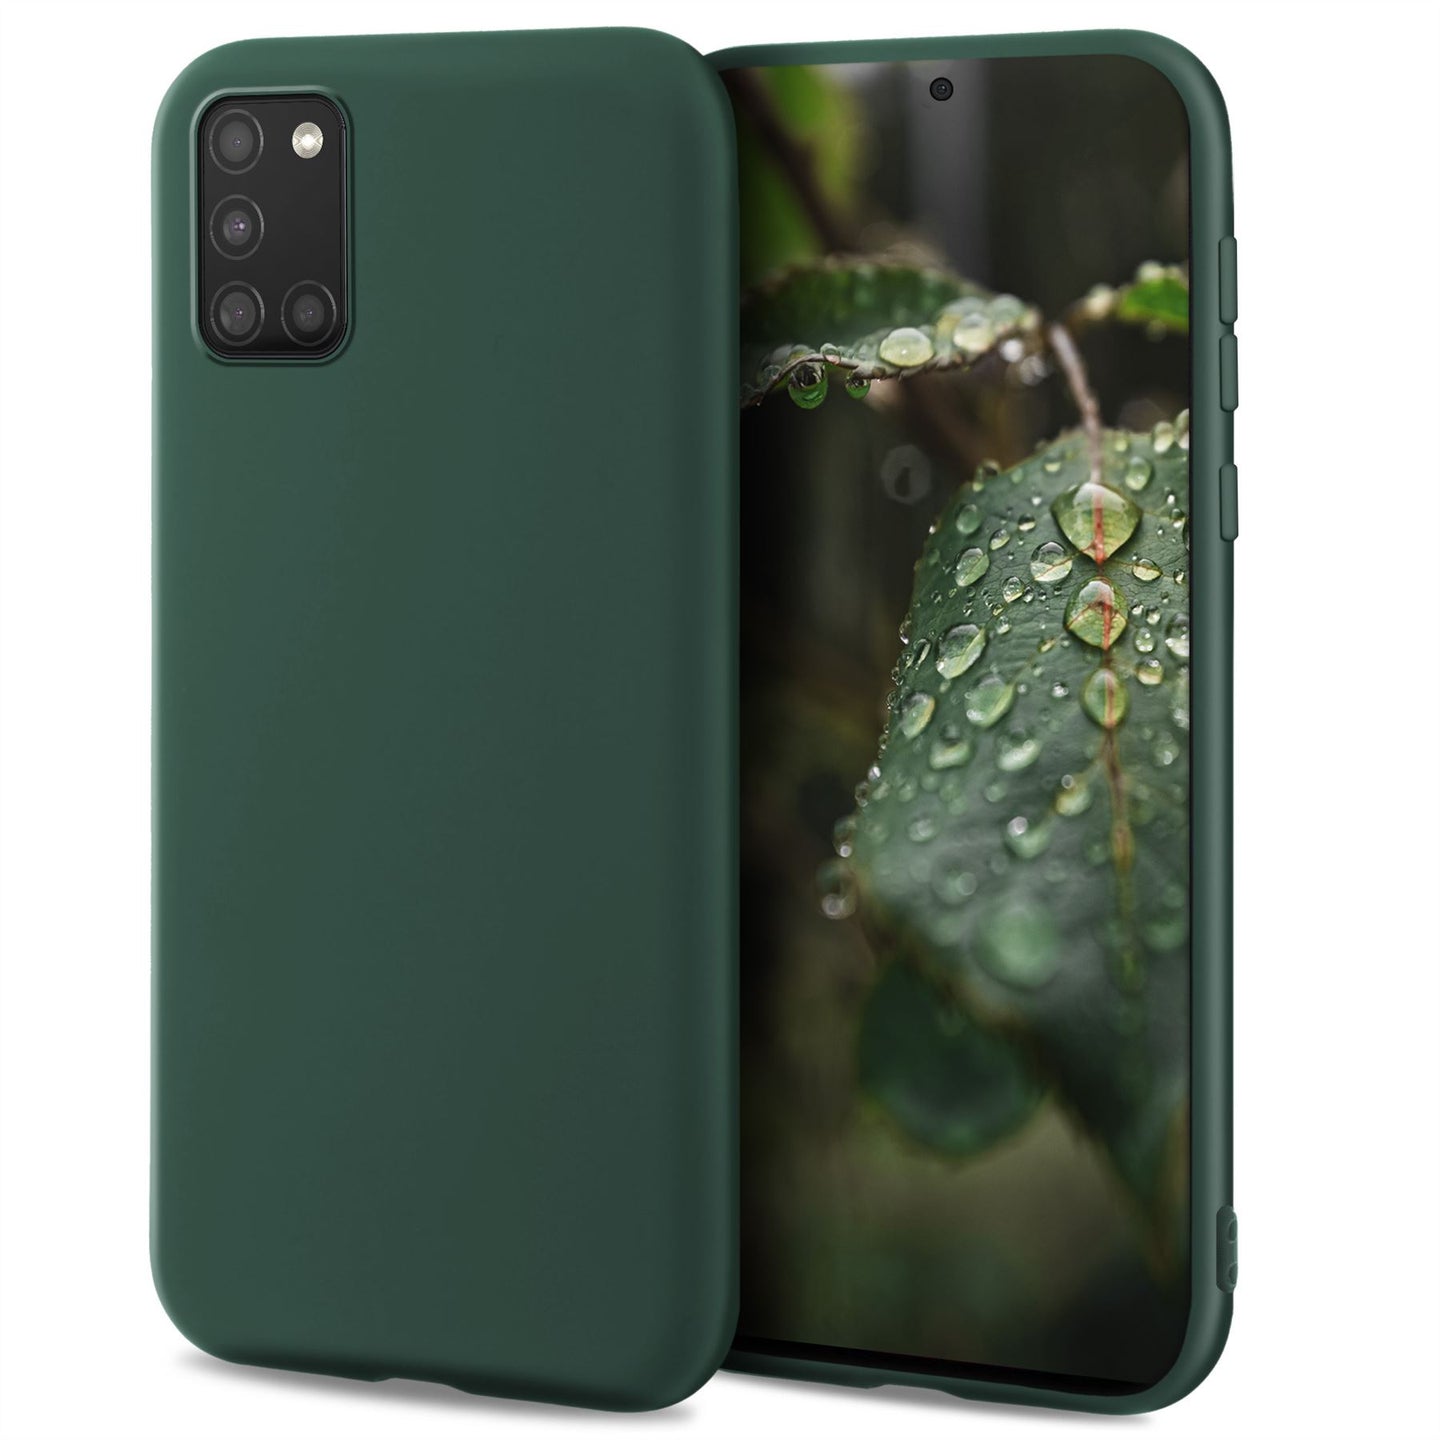 Moozy Lifestyle. Designed for Samsung A51 Case, Dark Green - Liquid Silicone Cover with Matte Finish and Soft Microfiber Lining